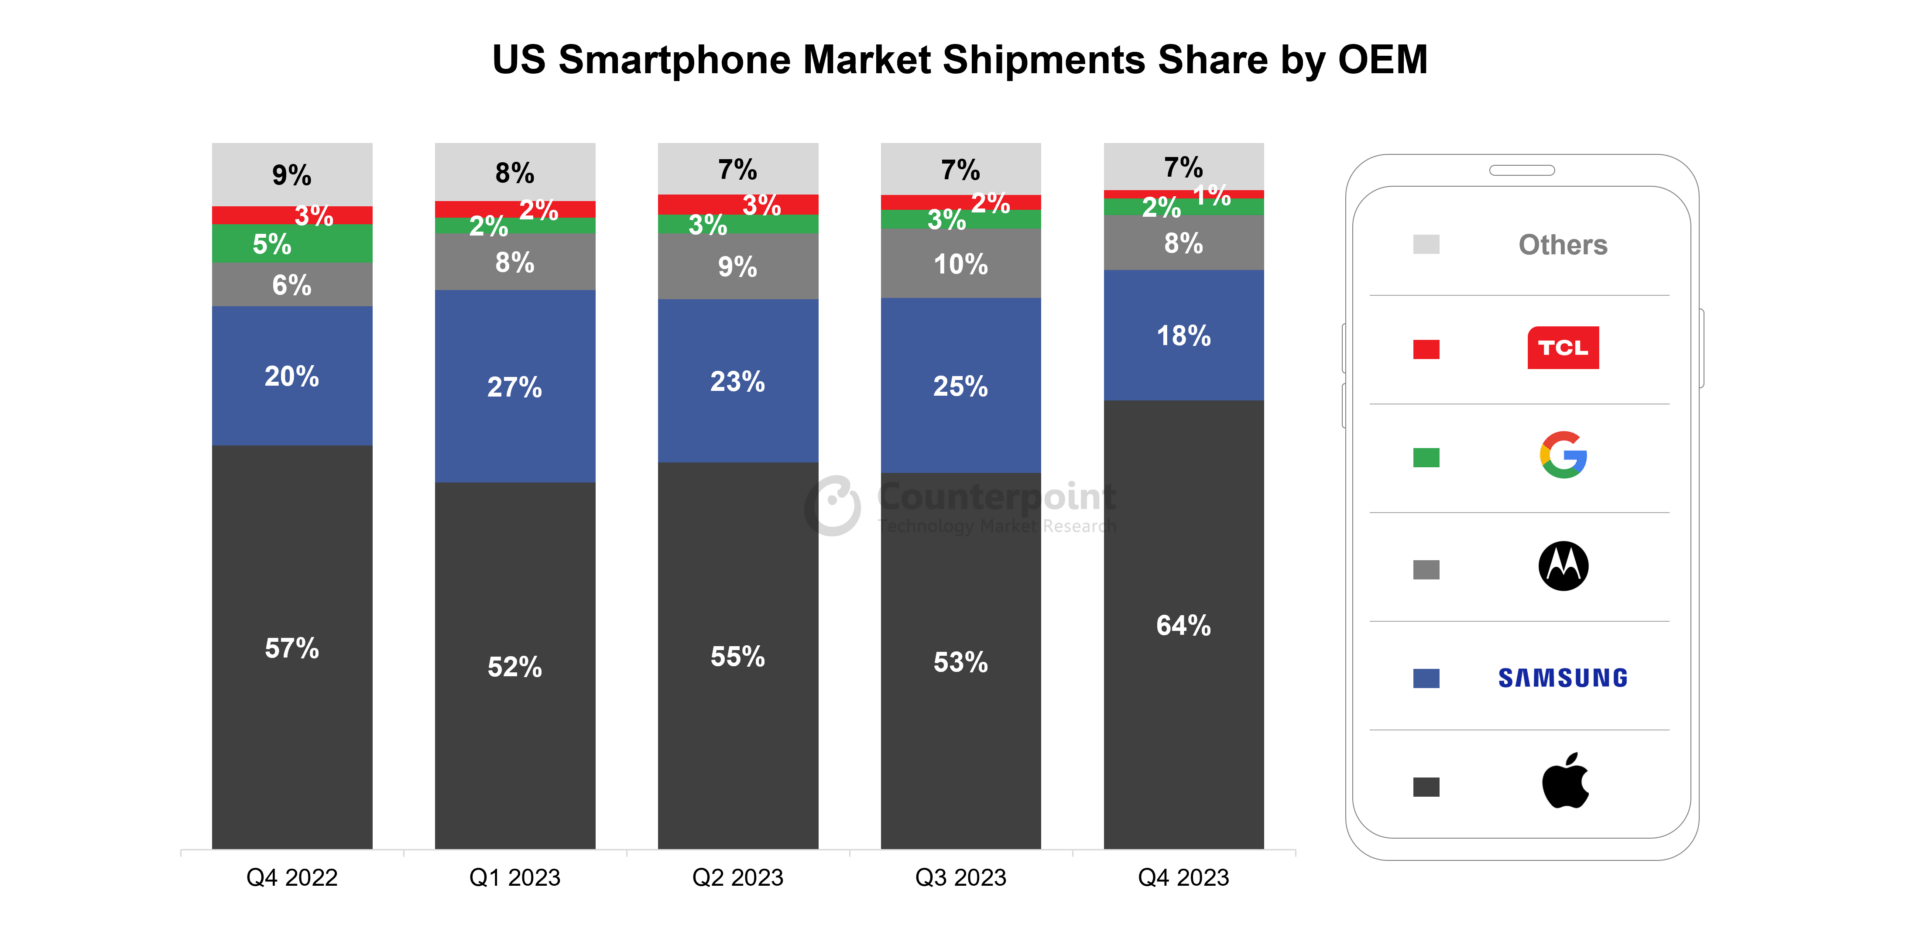 Source: [Counterpoint Market Monitor](https://www.counterpointresearch.com/insights/us-smartphone-market-q4-2023/).